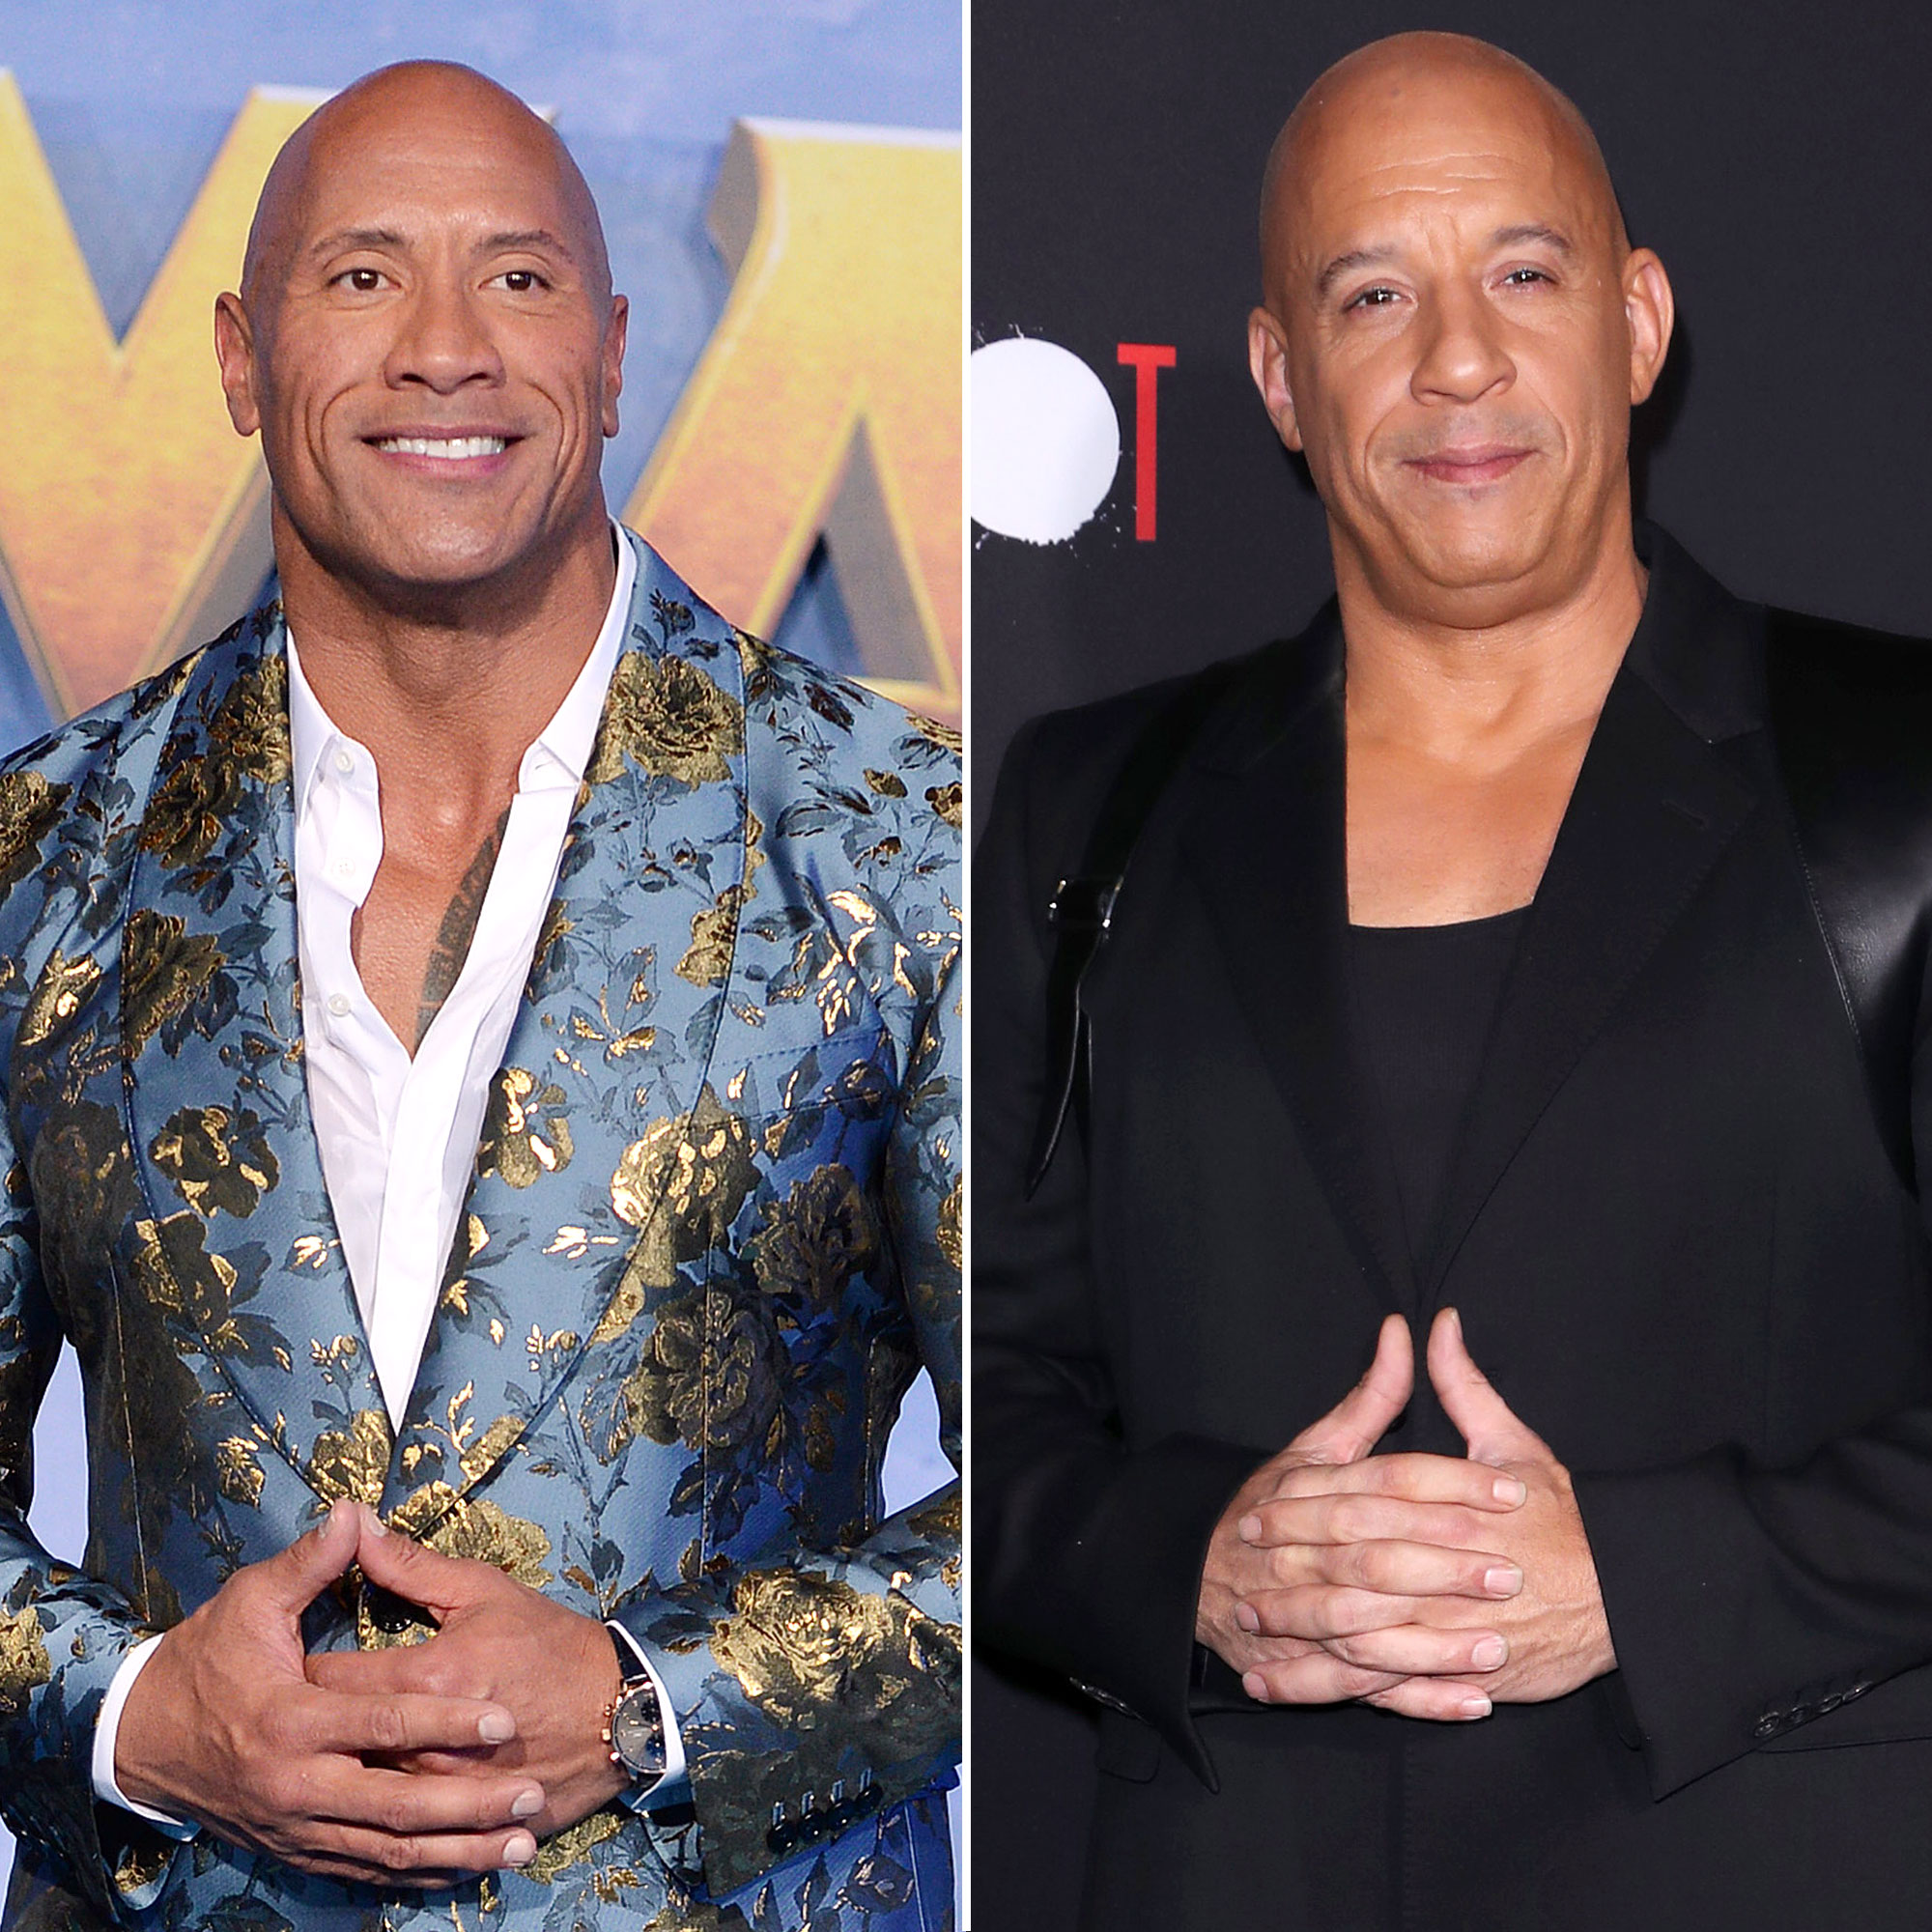 Dwayne Johnson goes indie with 'Fighting With My Family'